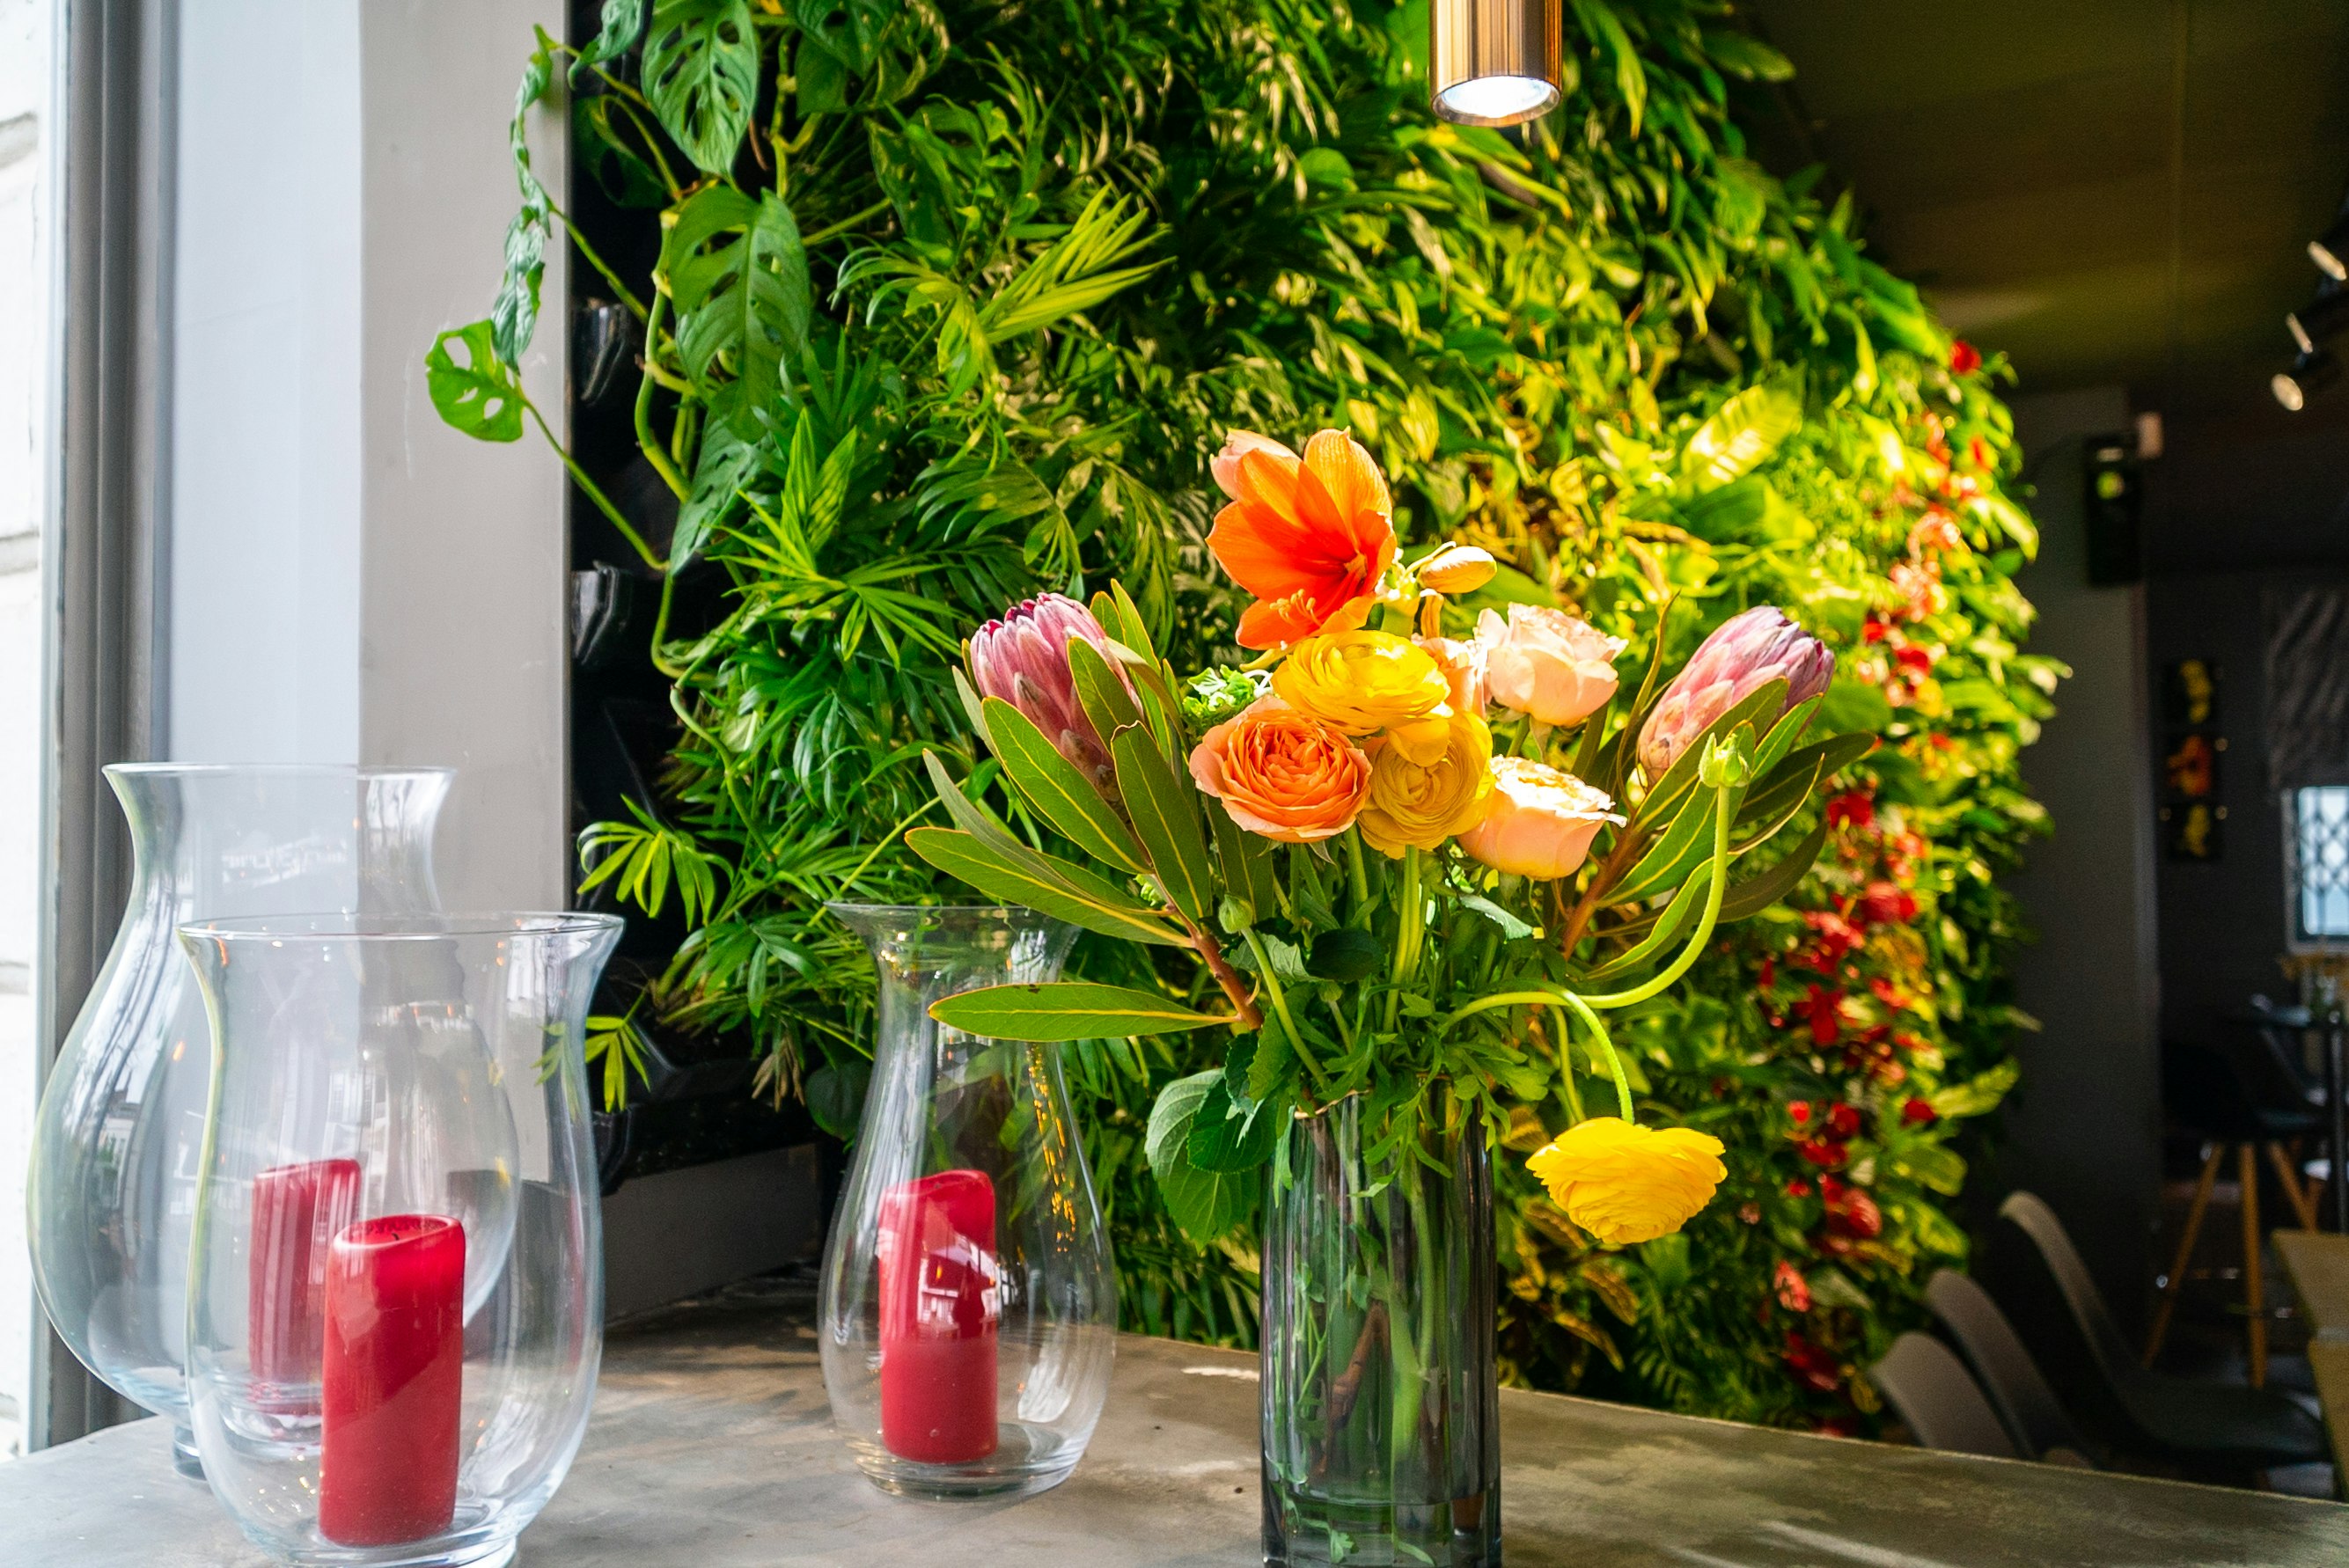 A table is pictured with a vase of flowers and three clear vases contain red candles. In the backdrop is a green living foliage wall inside a restaurant.